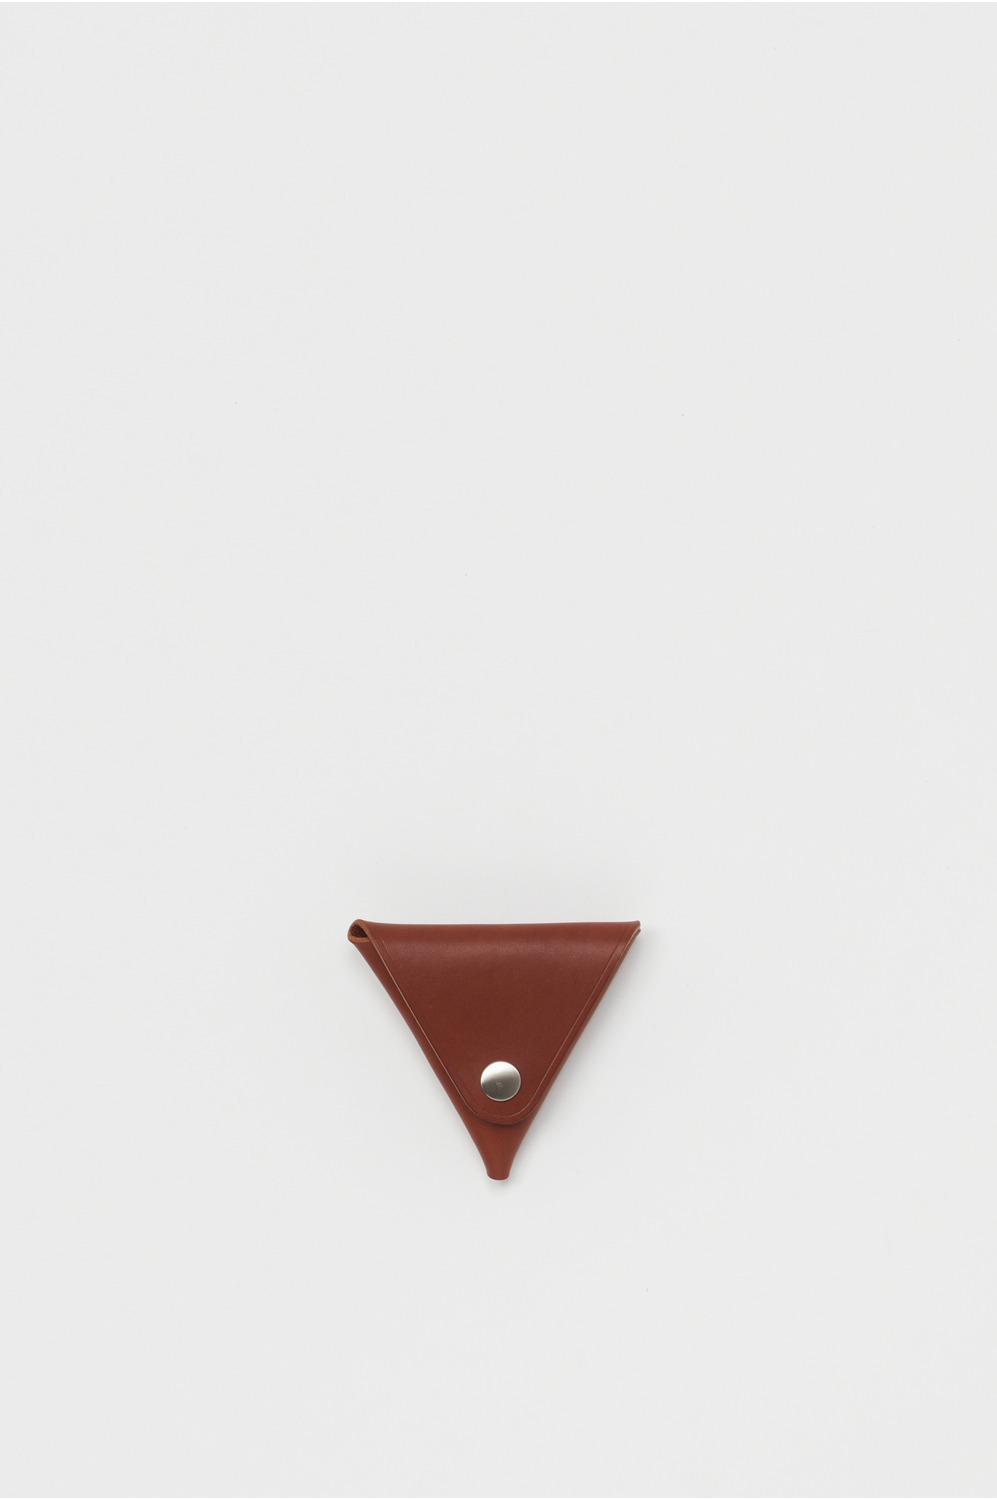 triangle coin case 詳細画像 brown 1